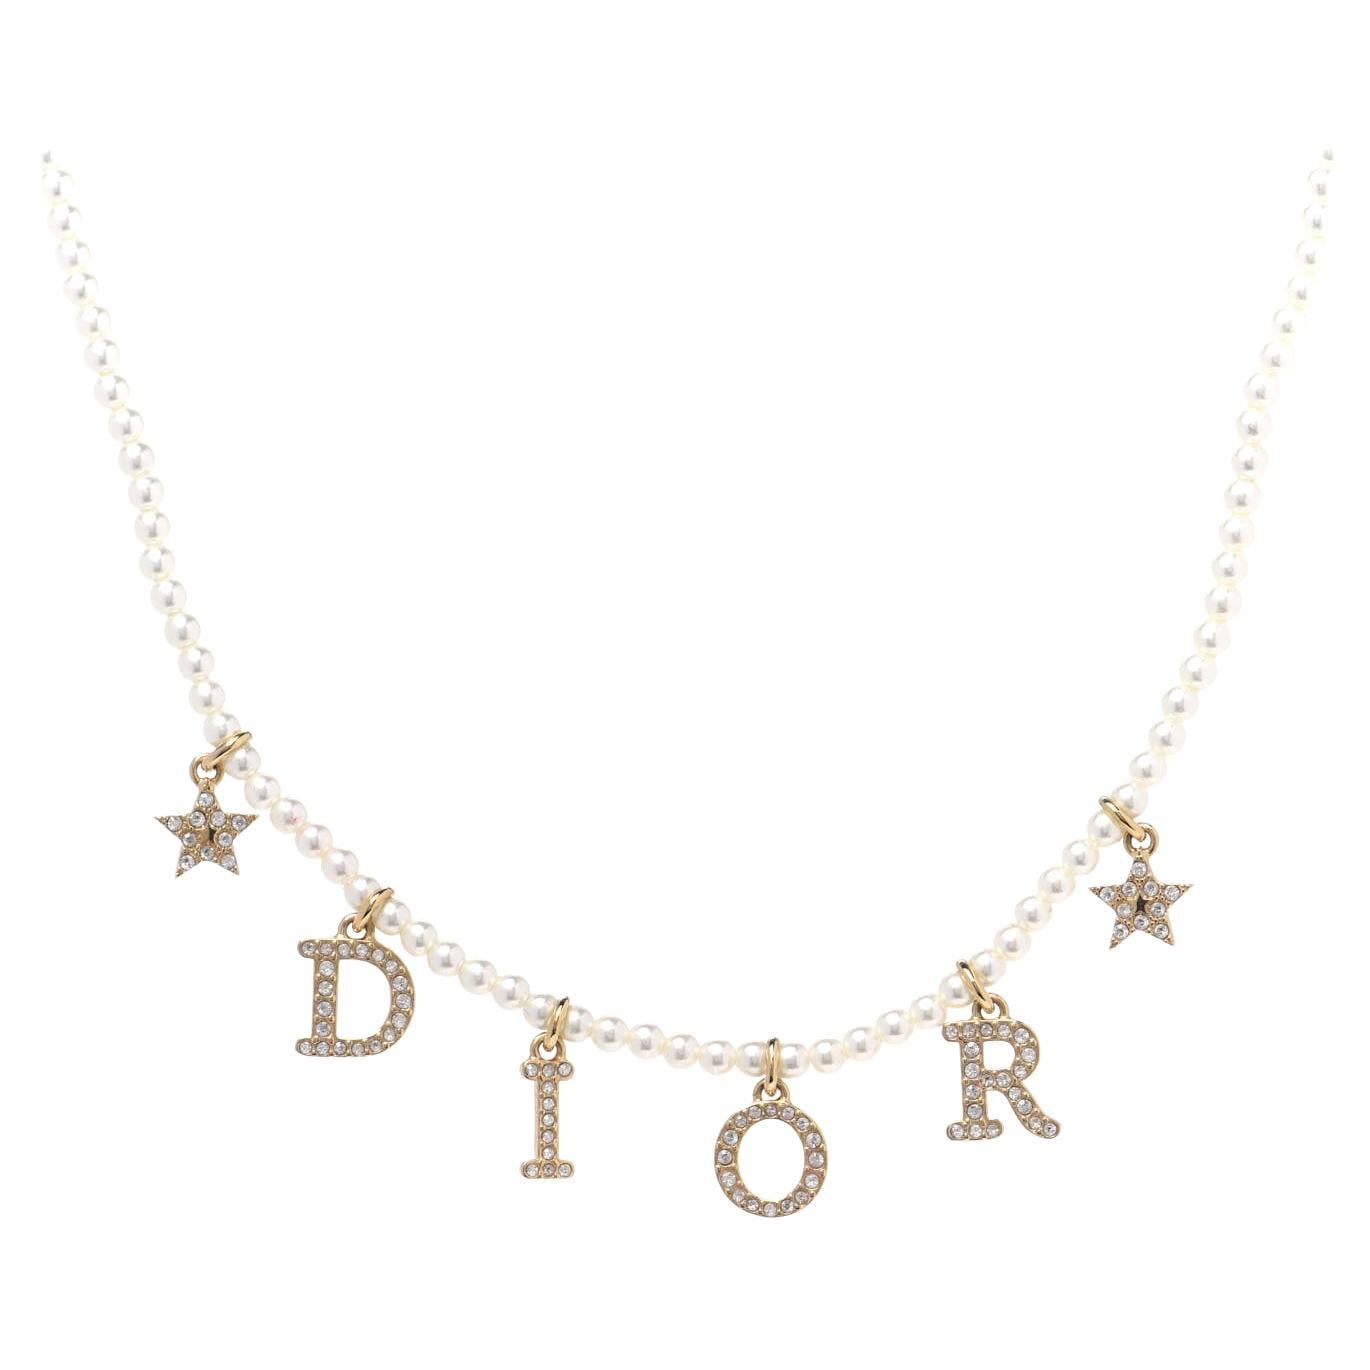 Diorevolution Necklace GoldFinish Metal and White Crystals  DIOR AU